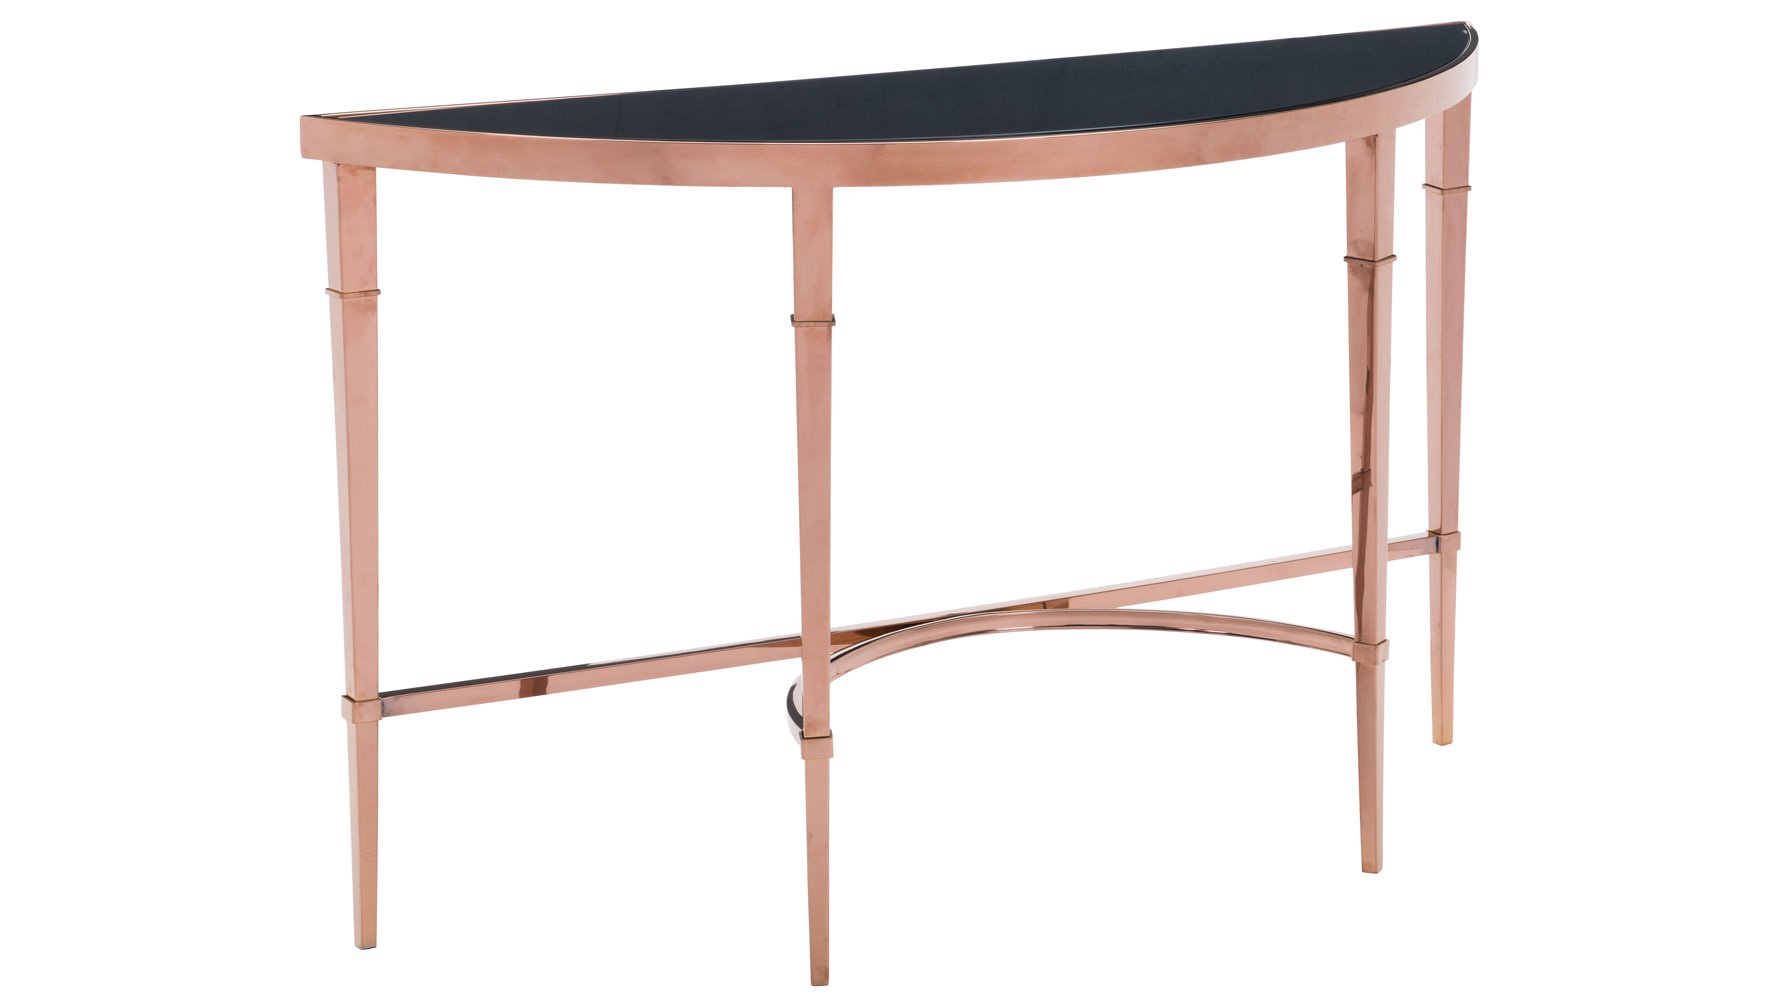 modern pascale glass console table rose gold black zuri furniture and bar height accent drop leaf dinette sets entrance dorm room supplies legs round french side plexi butcher